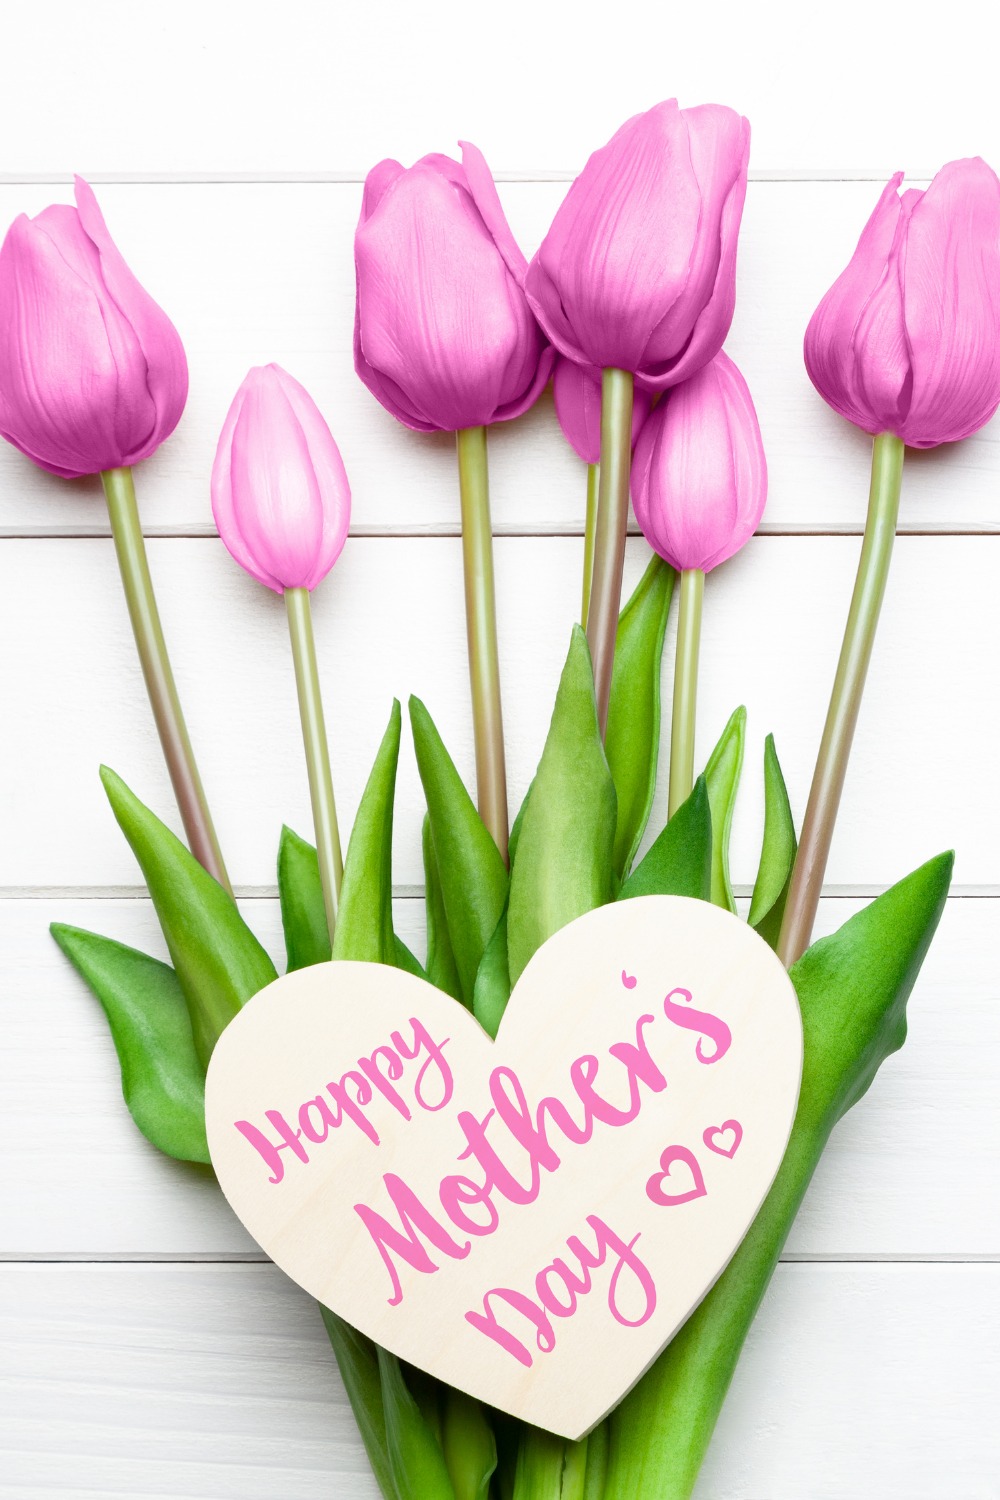 Happy Mothers Day images, happy Mothers day aesthetic. Happy Mothers day images elegant, happy Mother's day images love you, happy Mother's Day I love you images, wishing you a happy Mothers day images, happy Mothers day images cute, happy Mothers day images flowers, happy Mothers day images pink.